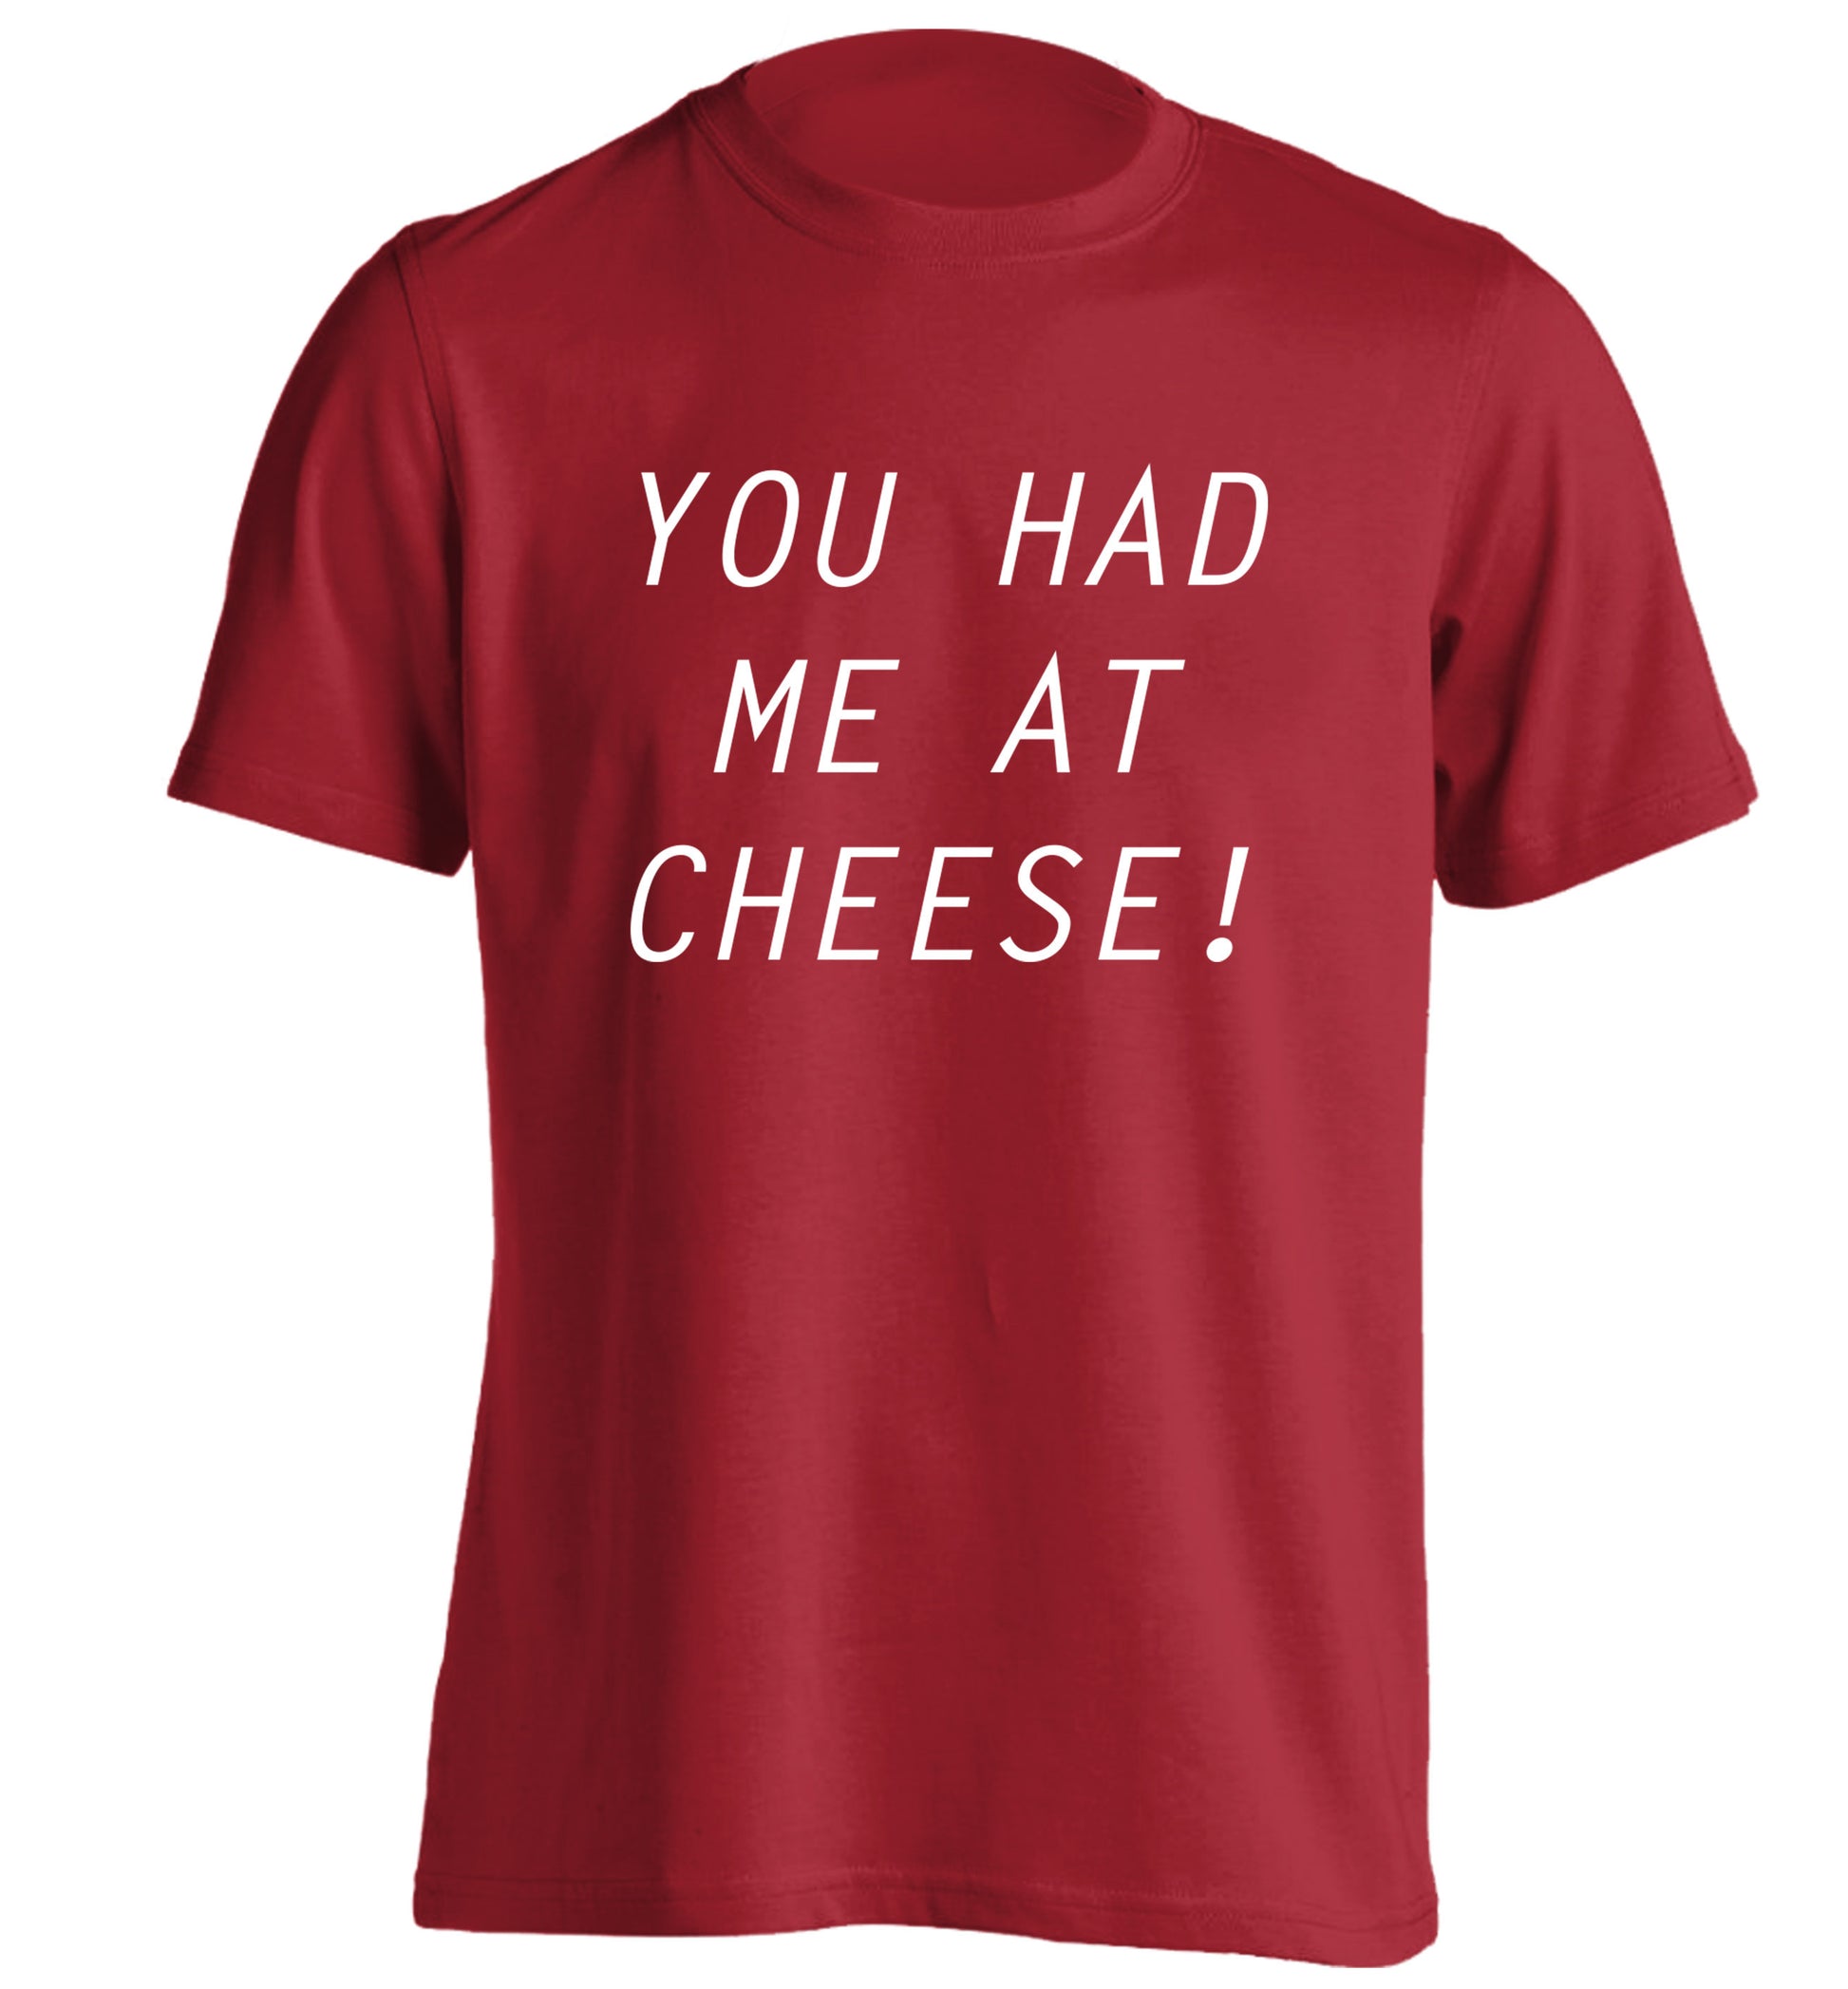 You had me at cheese adults unisex red Tshirt 2XL